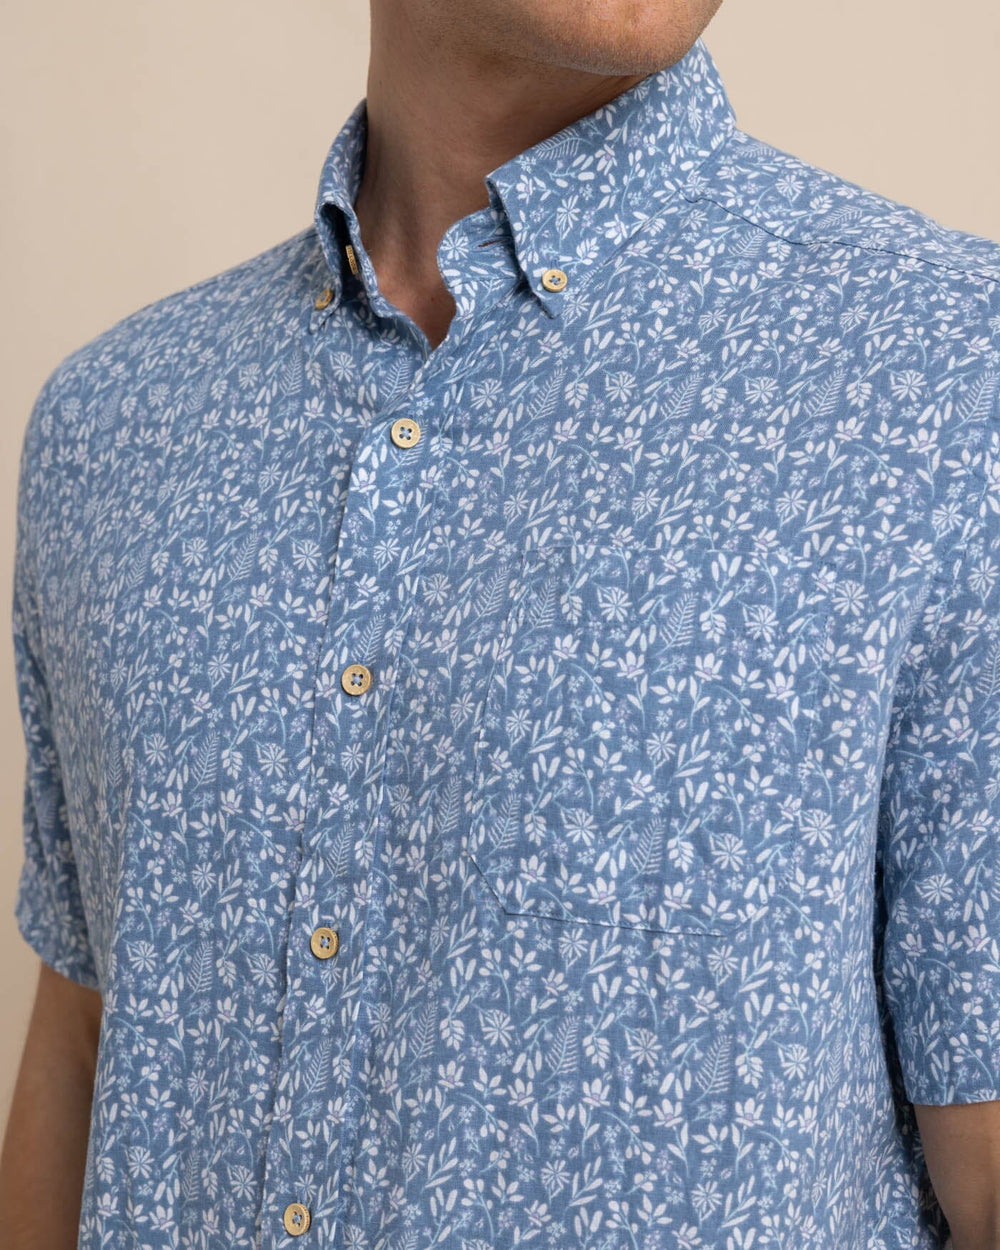 The detail view of the Southern Tide Linen Rayon Ditzy Floral Short Sleeve Sport Shirt by Southern Tide - Coronet Blue